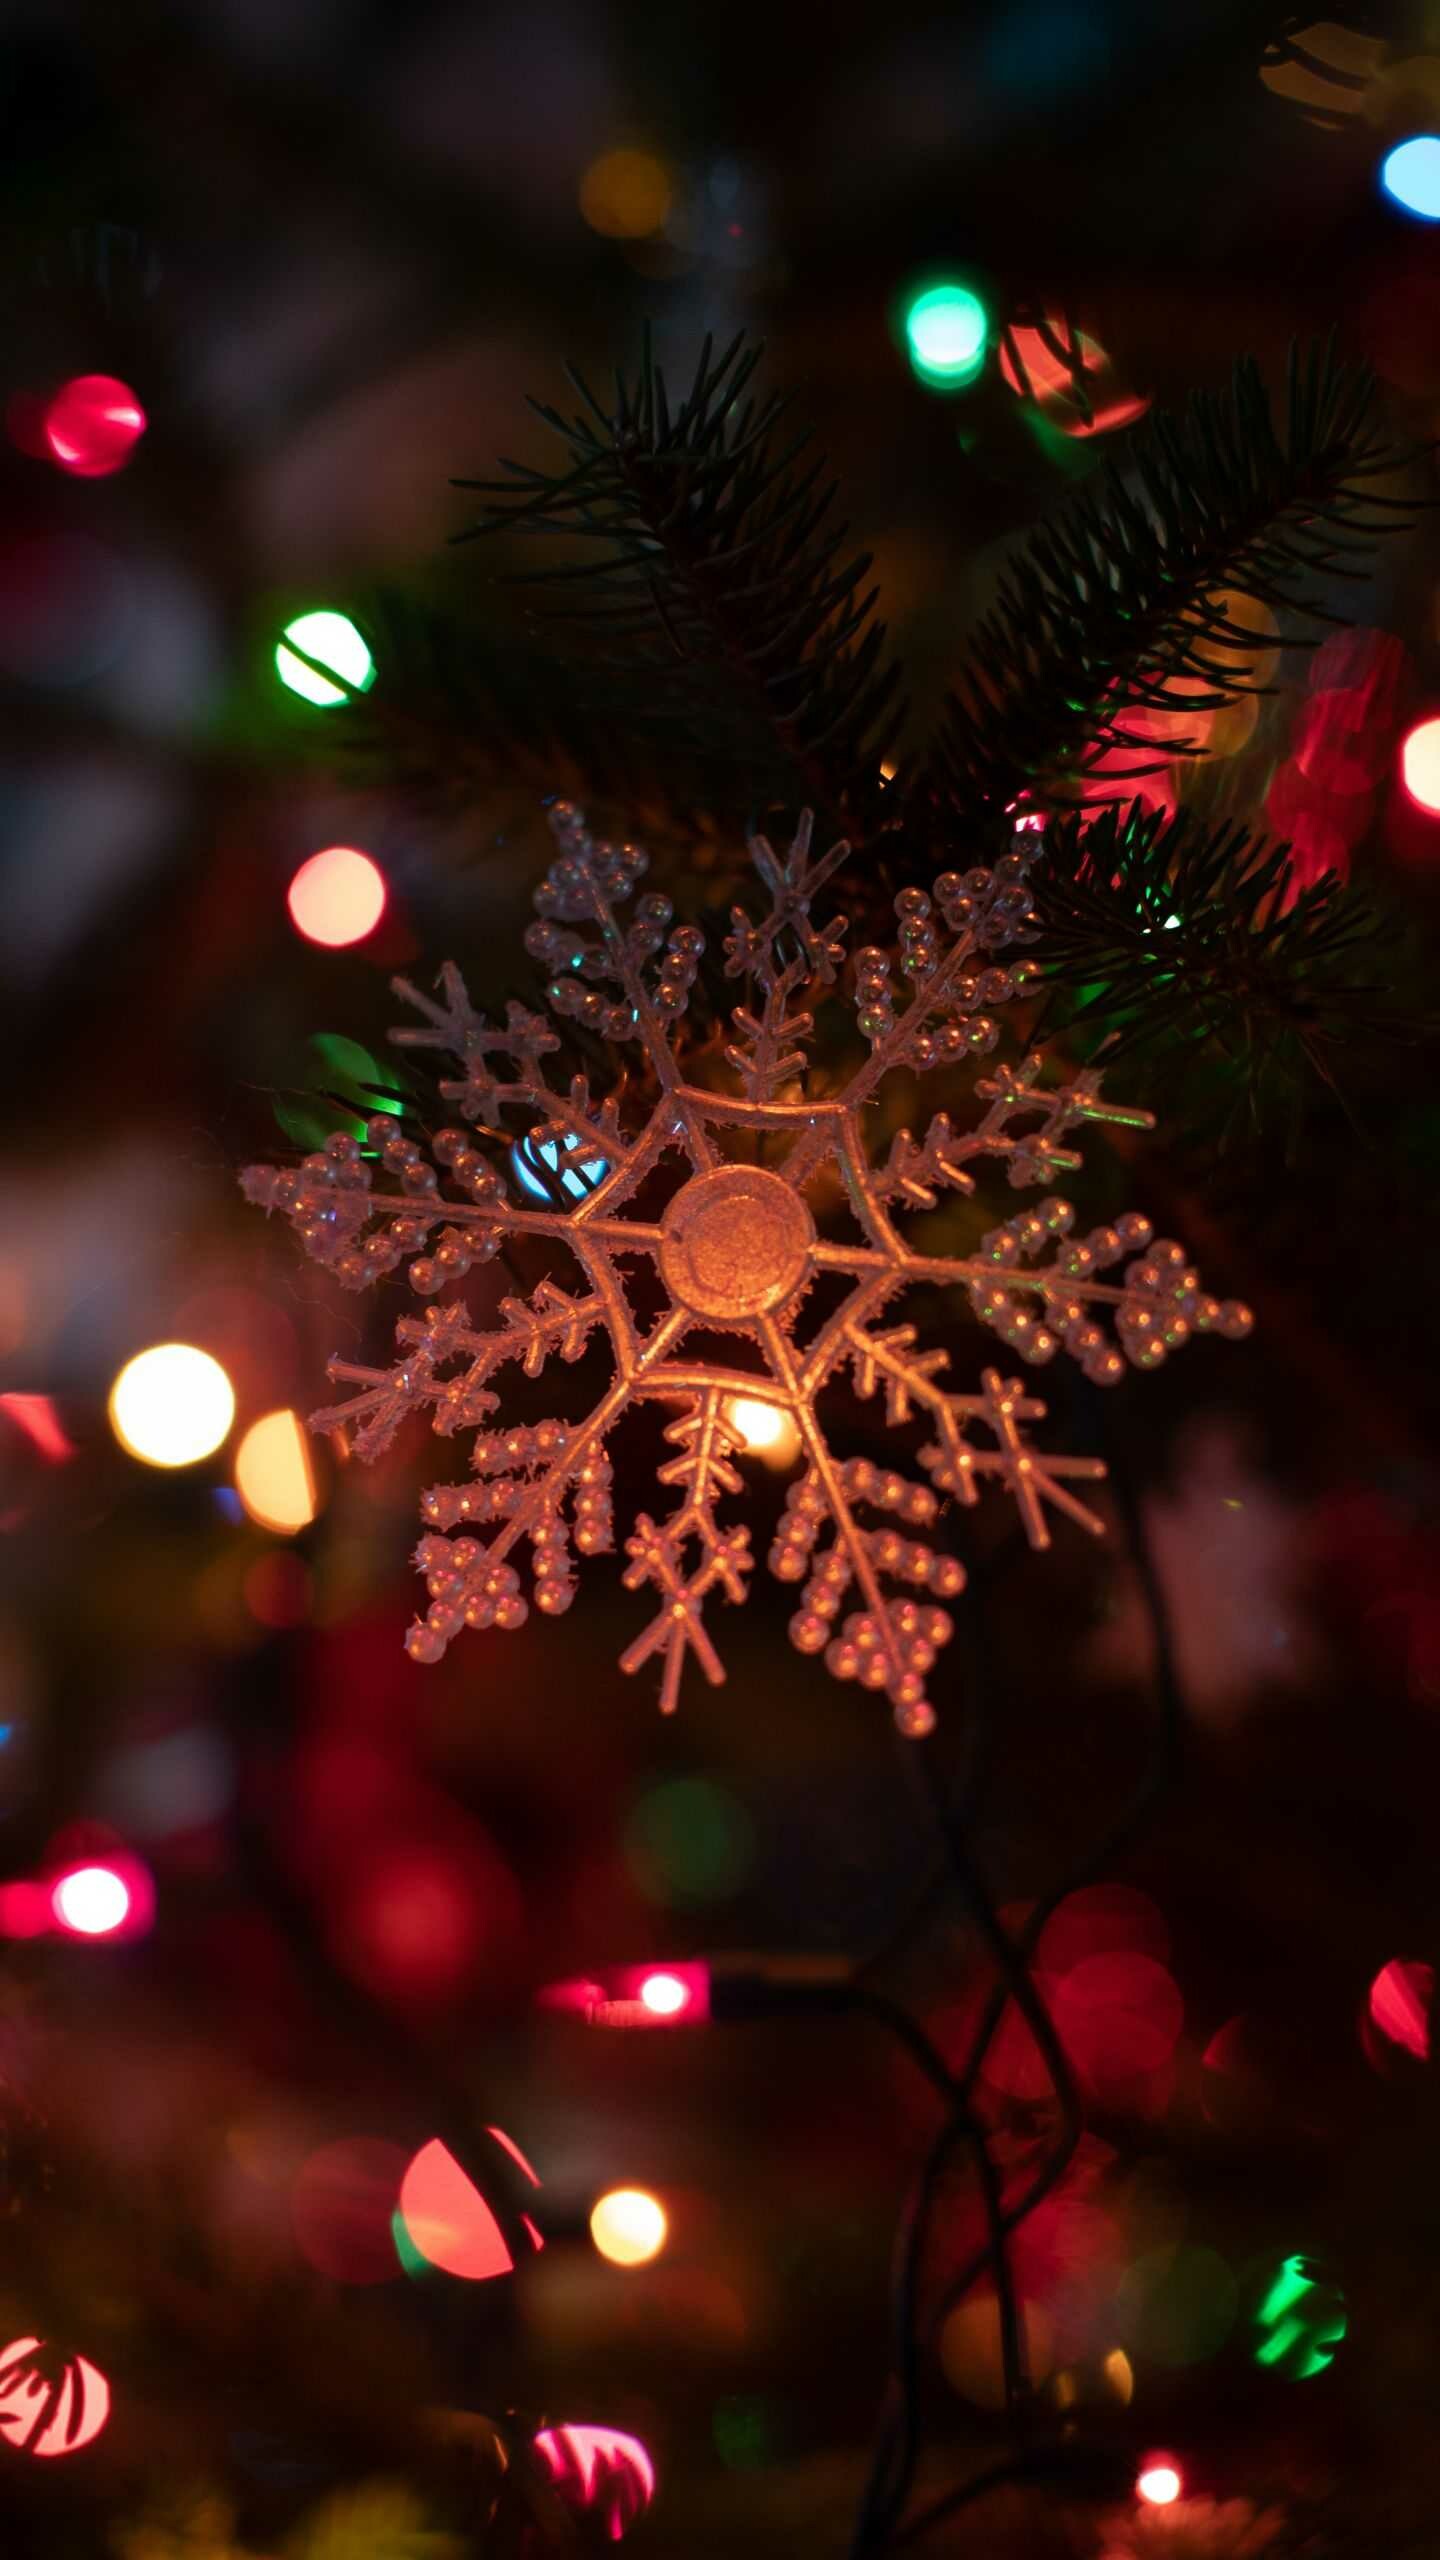 Christmas Lights: The first miniature holiday illumination was manufactured in Italy. 1440x2560 HD Wallpaper.